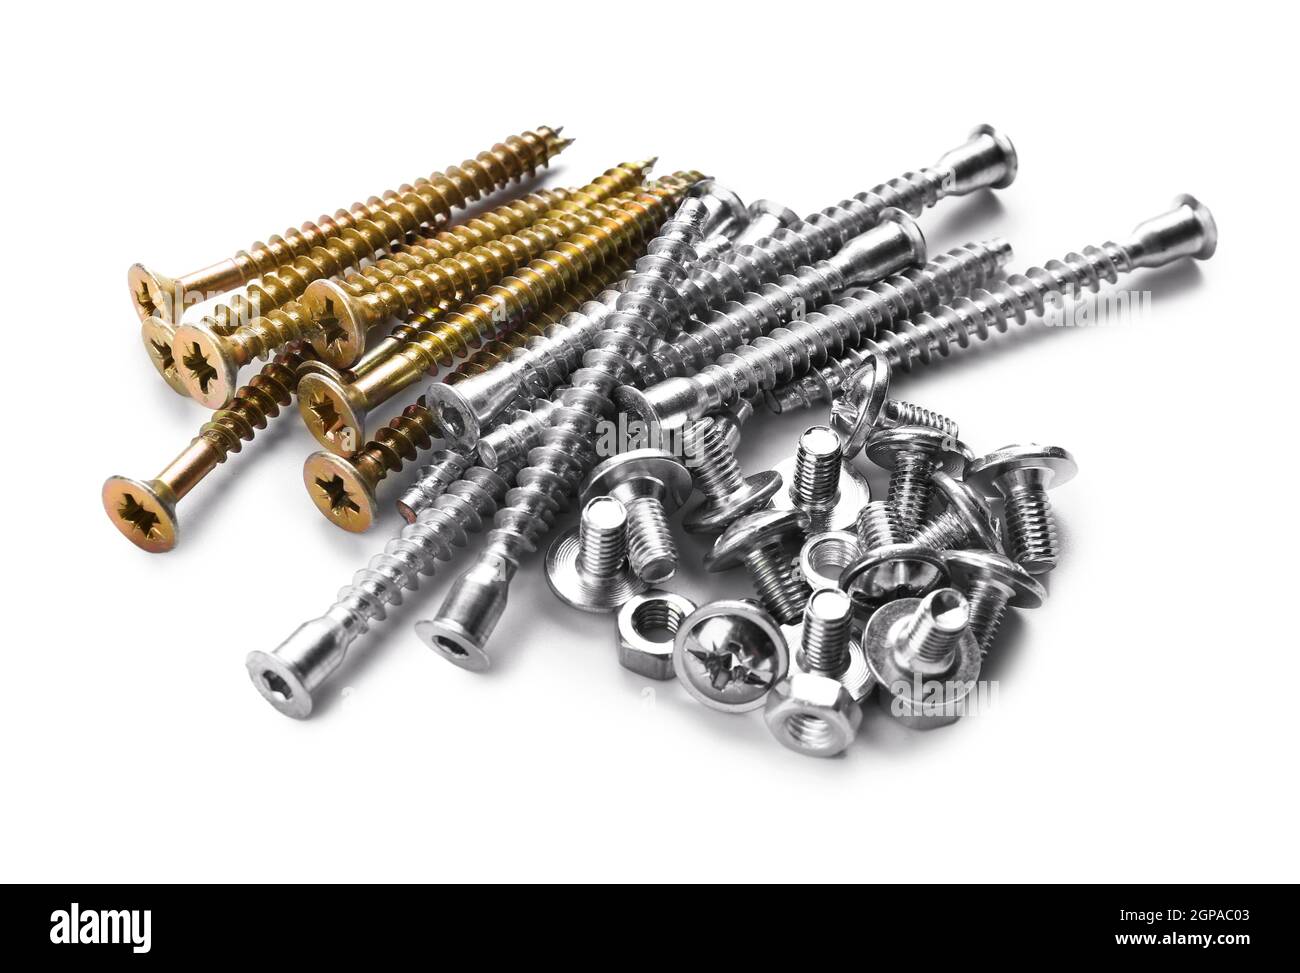 Bolts, screws and nuts on white background Stock Photo